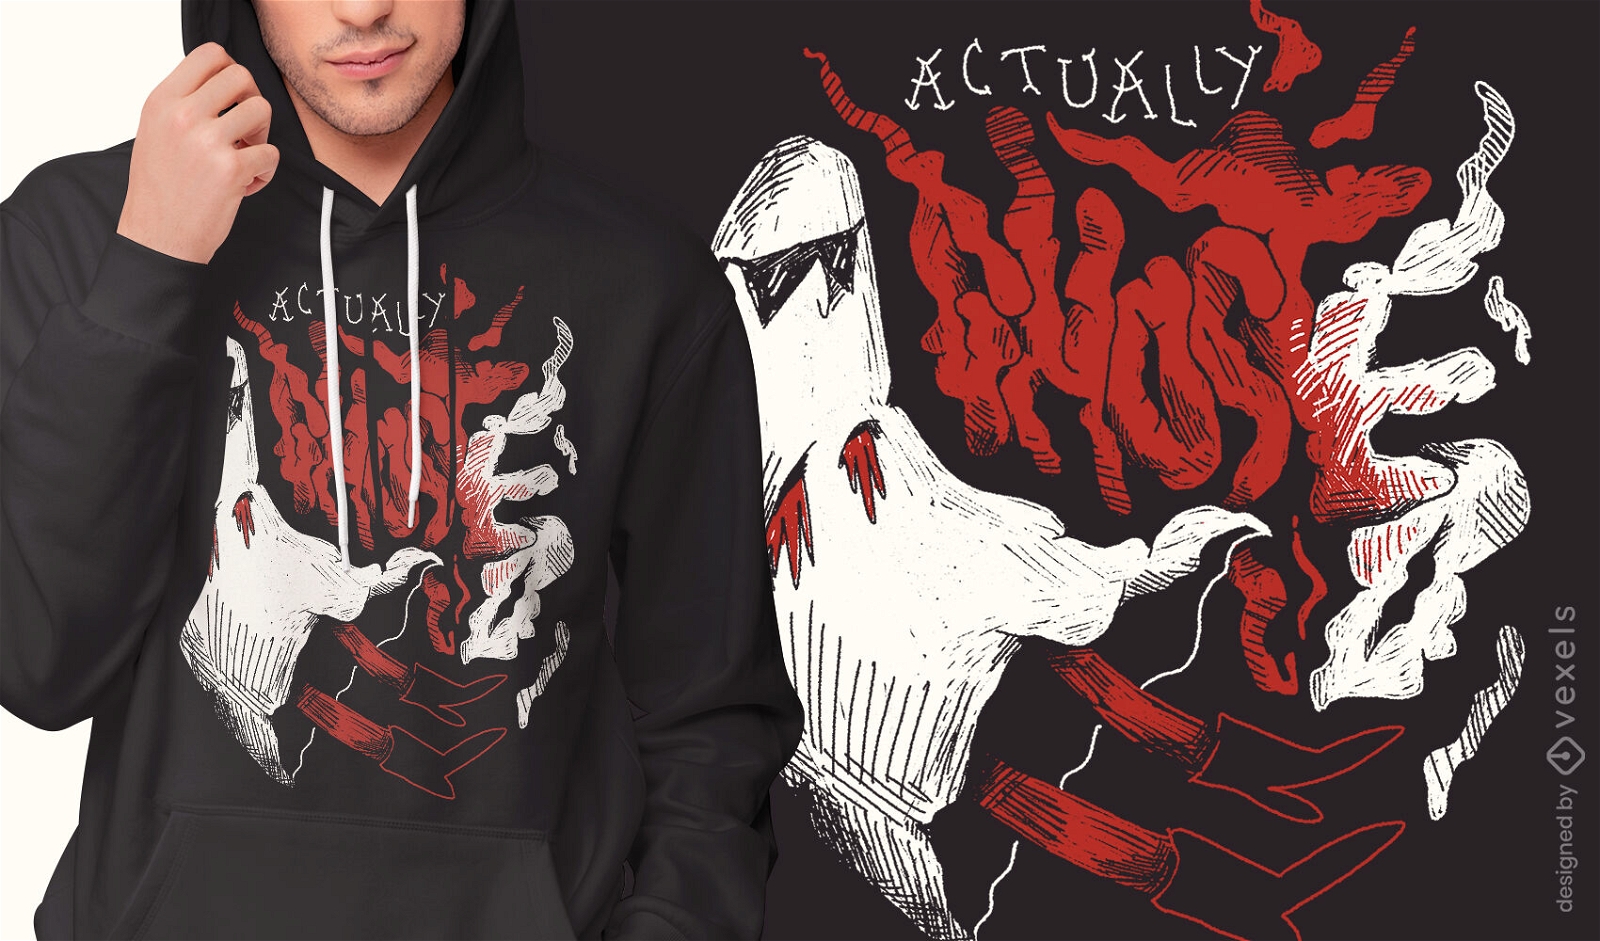 Actually ghosted afterlife t-shirt design